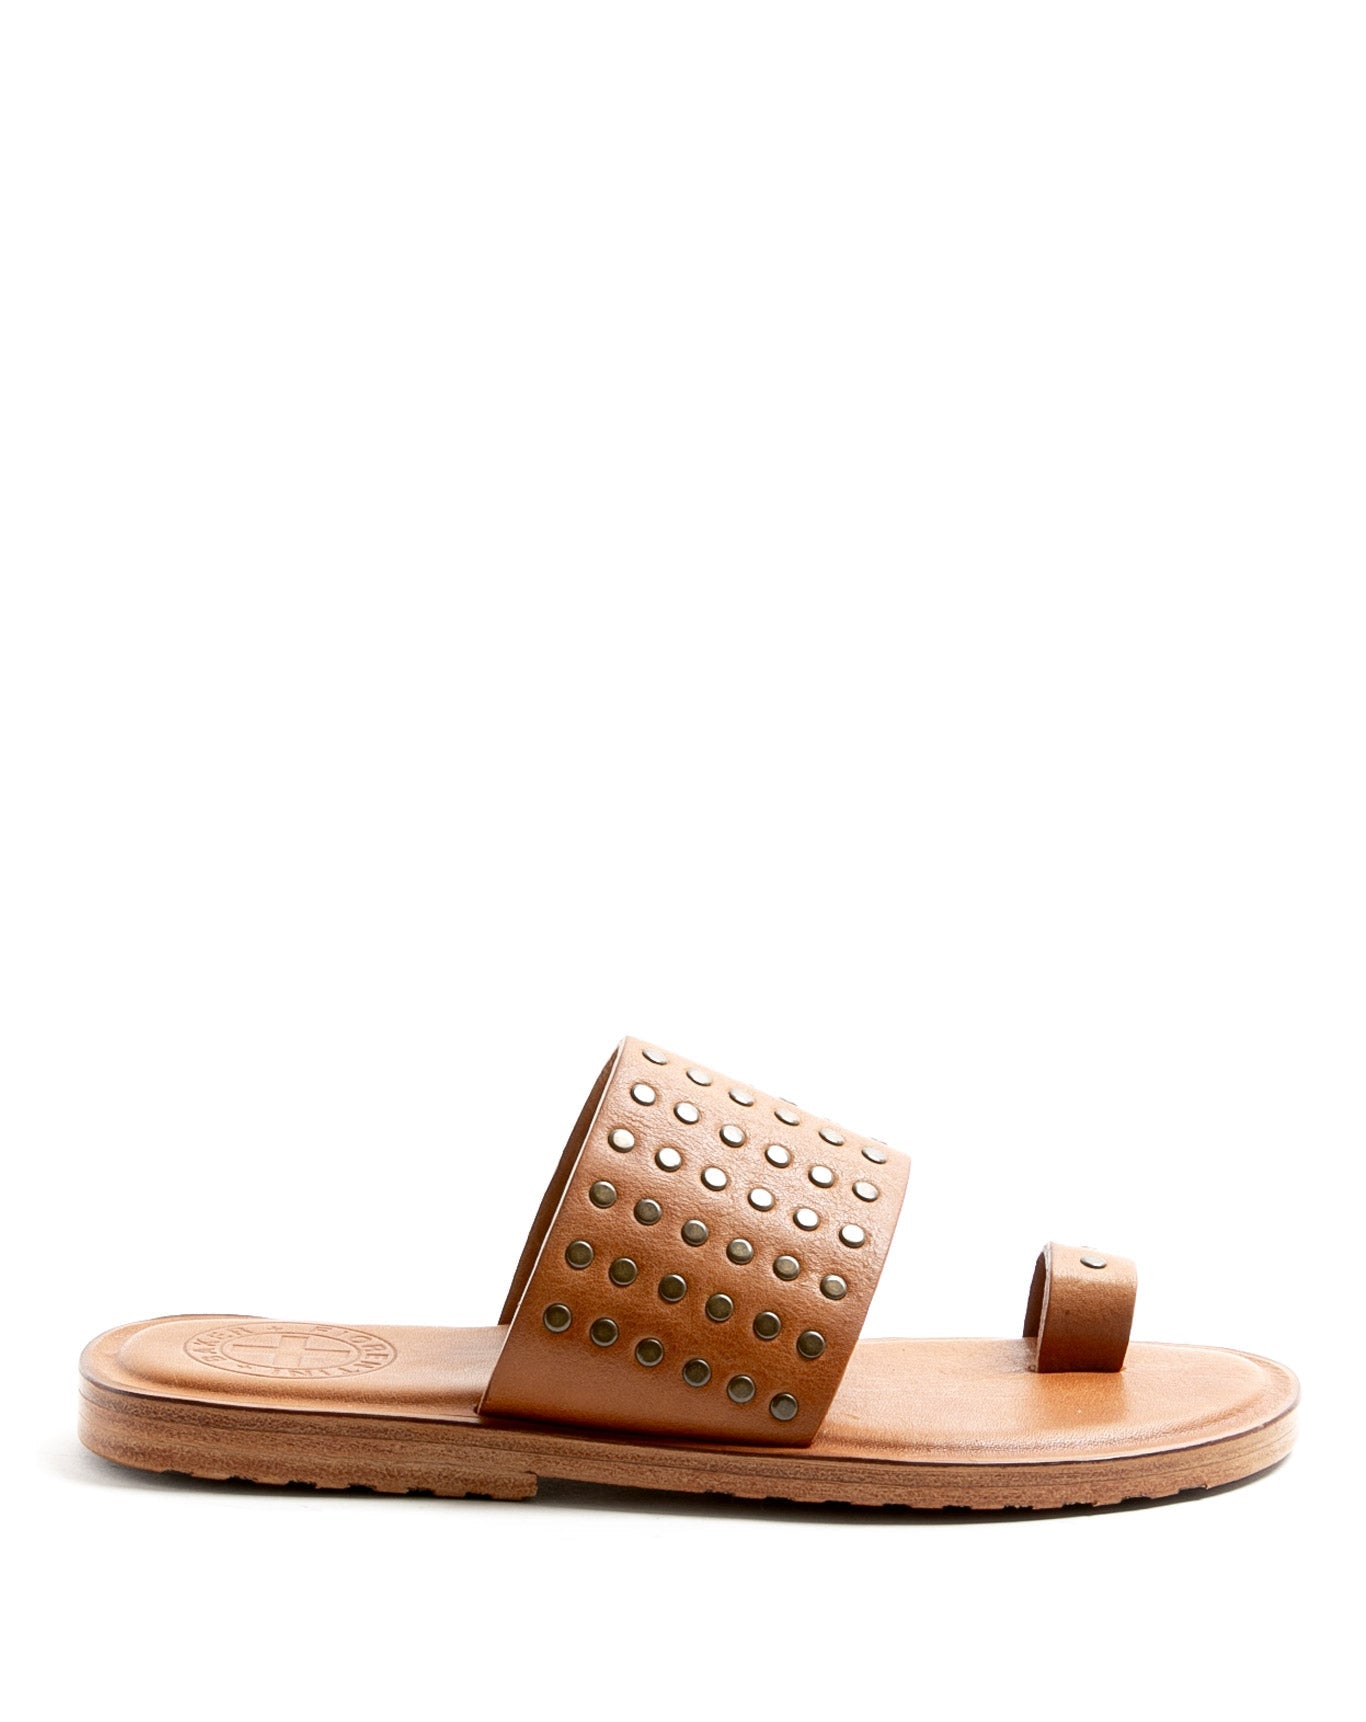 FIORENTINI + BAKER, ZANTE ZATTY, Extremely comfortable and supple lined leather slip on sandals with studs. Handcrafted by skilled artisans. Made in Italy. Made to last.